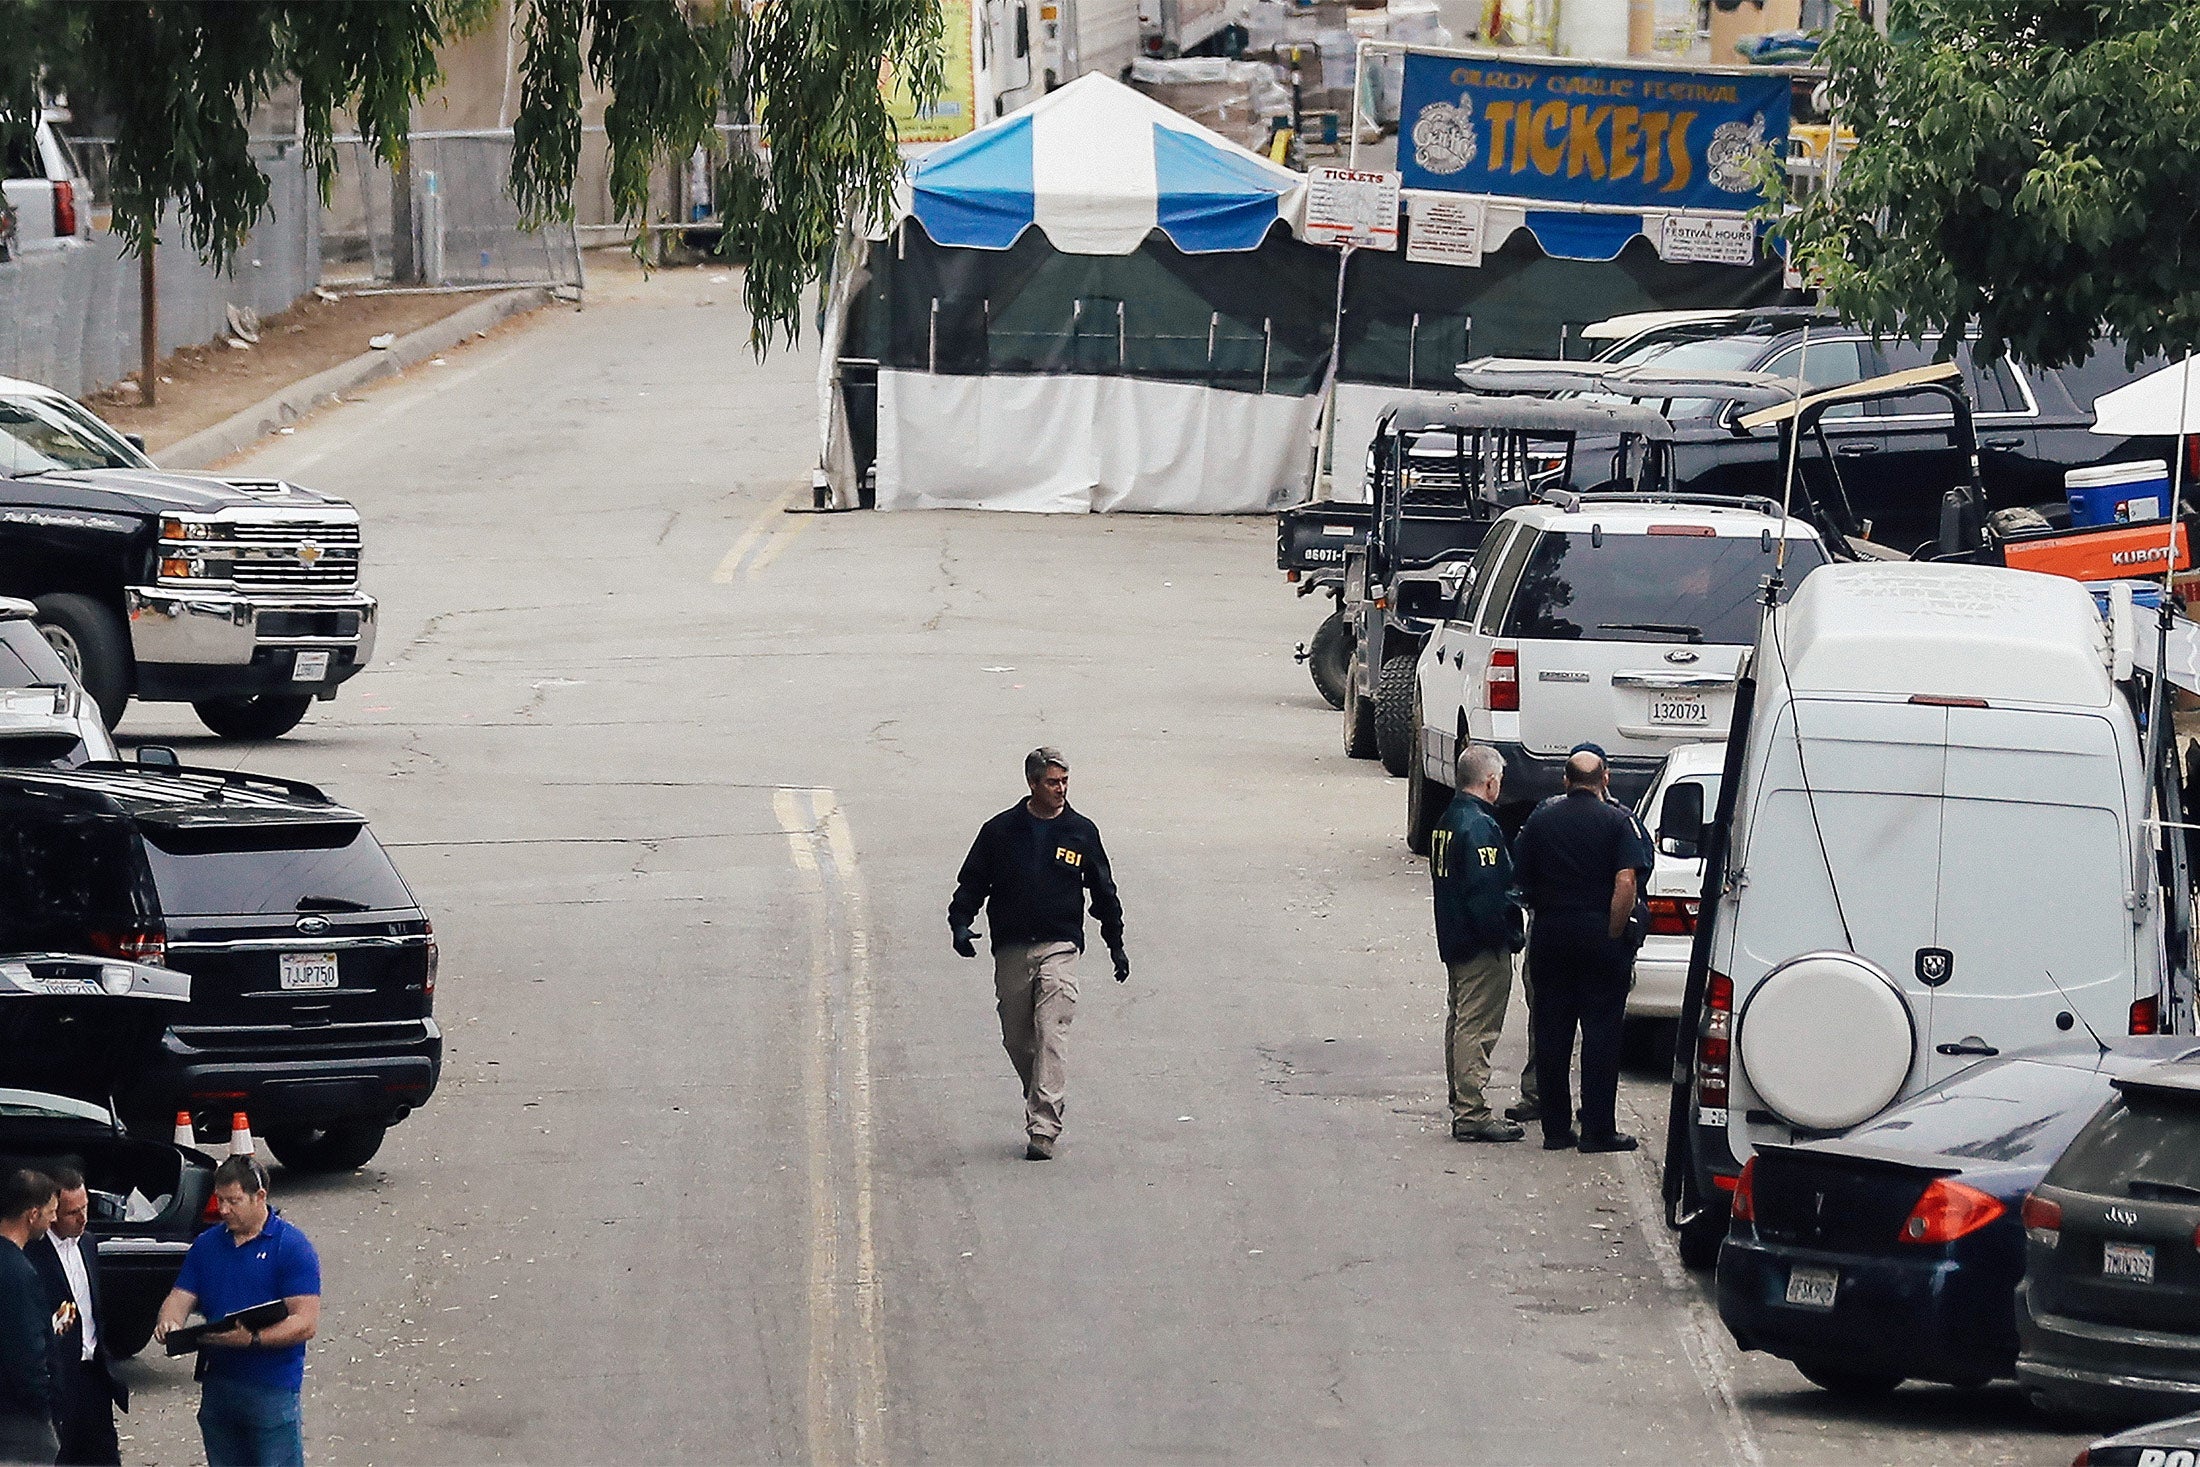 An FBI agent walks in the middle of a street near a ticketing booth for the Gilroy Garlic Festival.